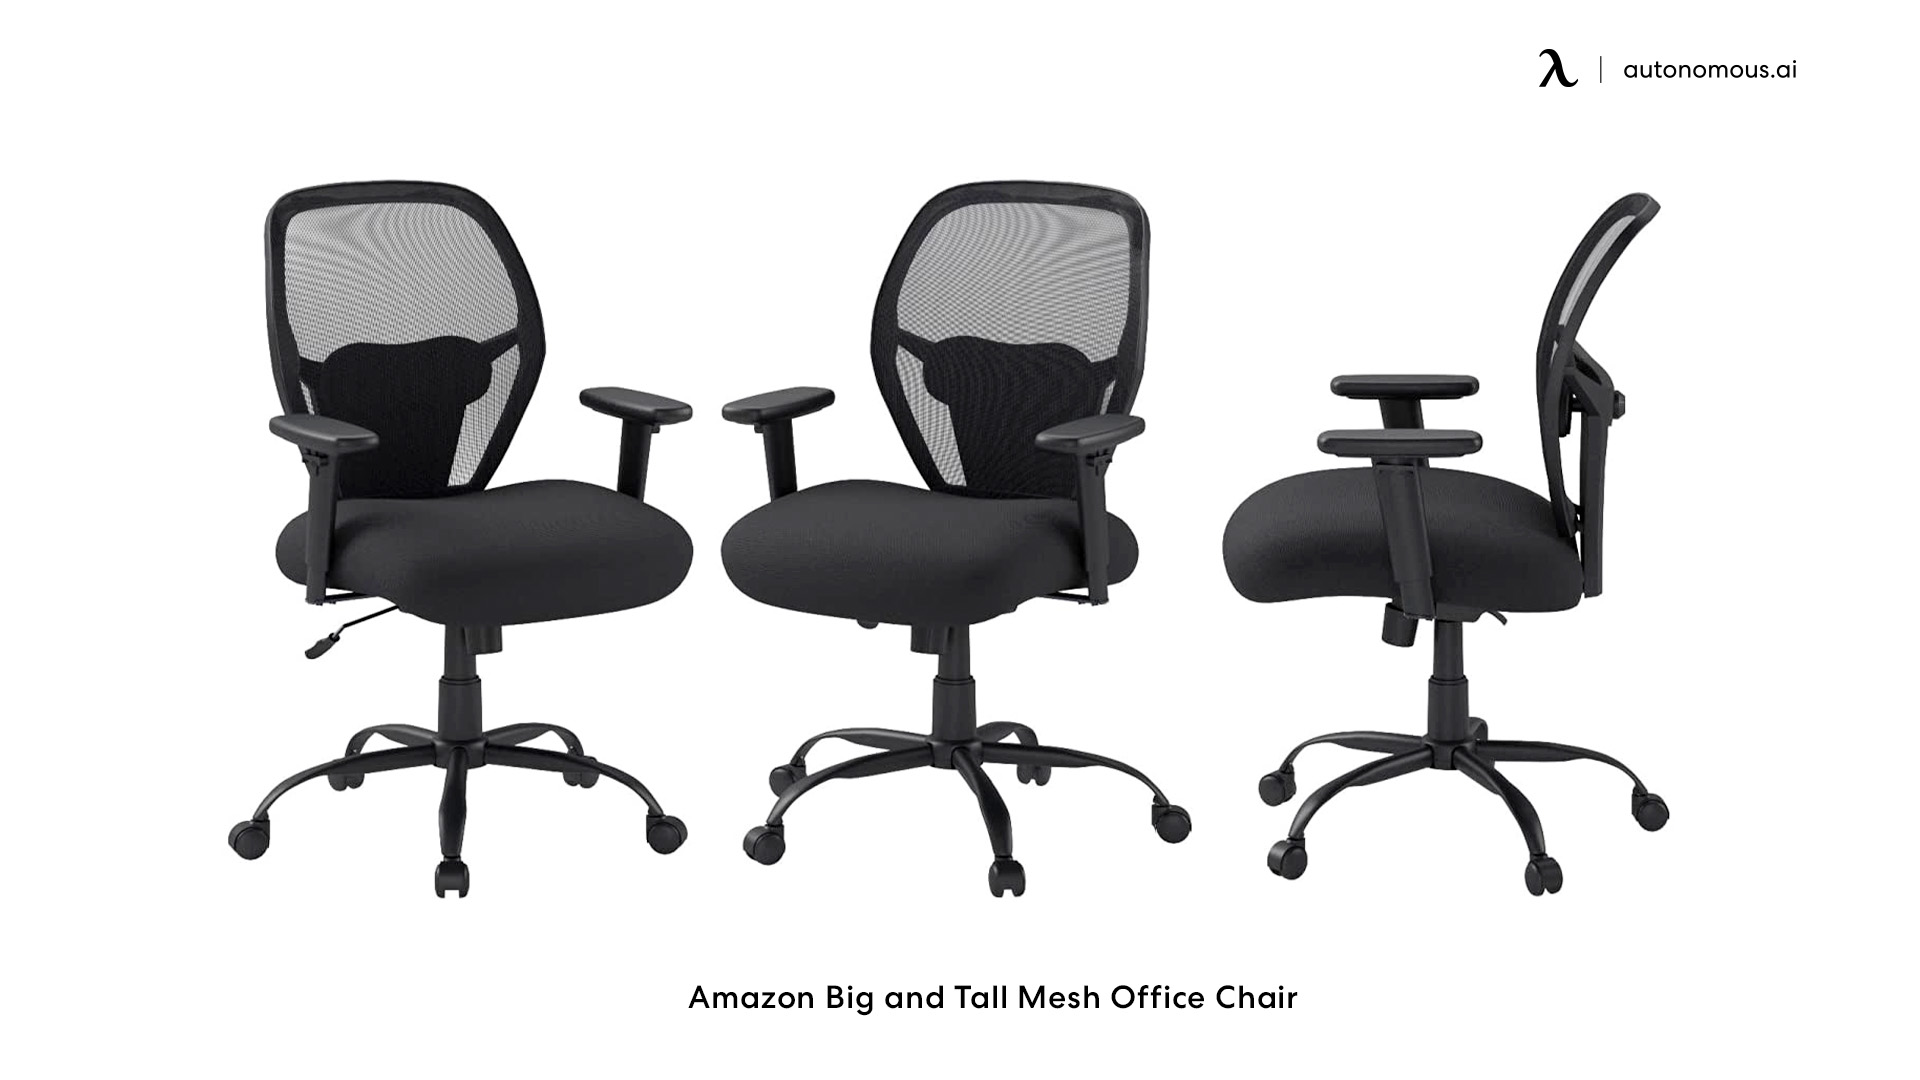 Amazon Big and Tall Mesh Office Chair